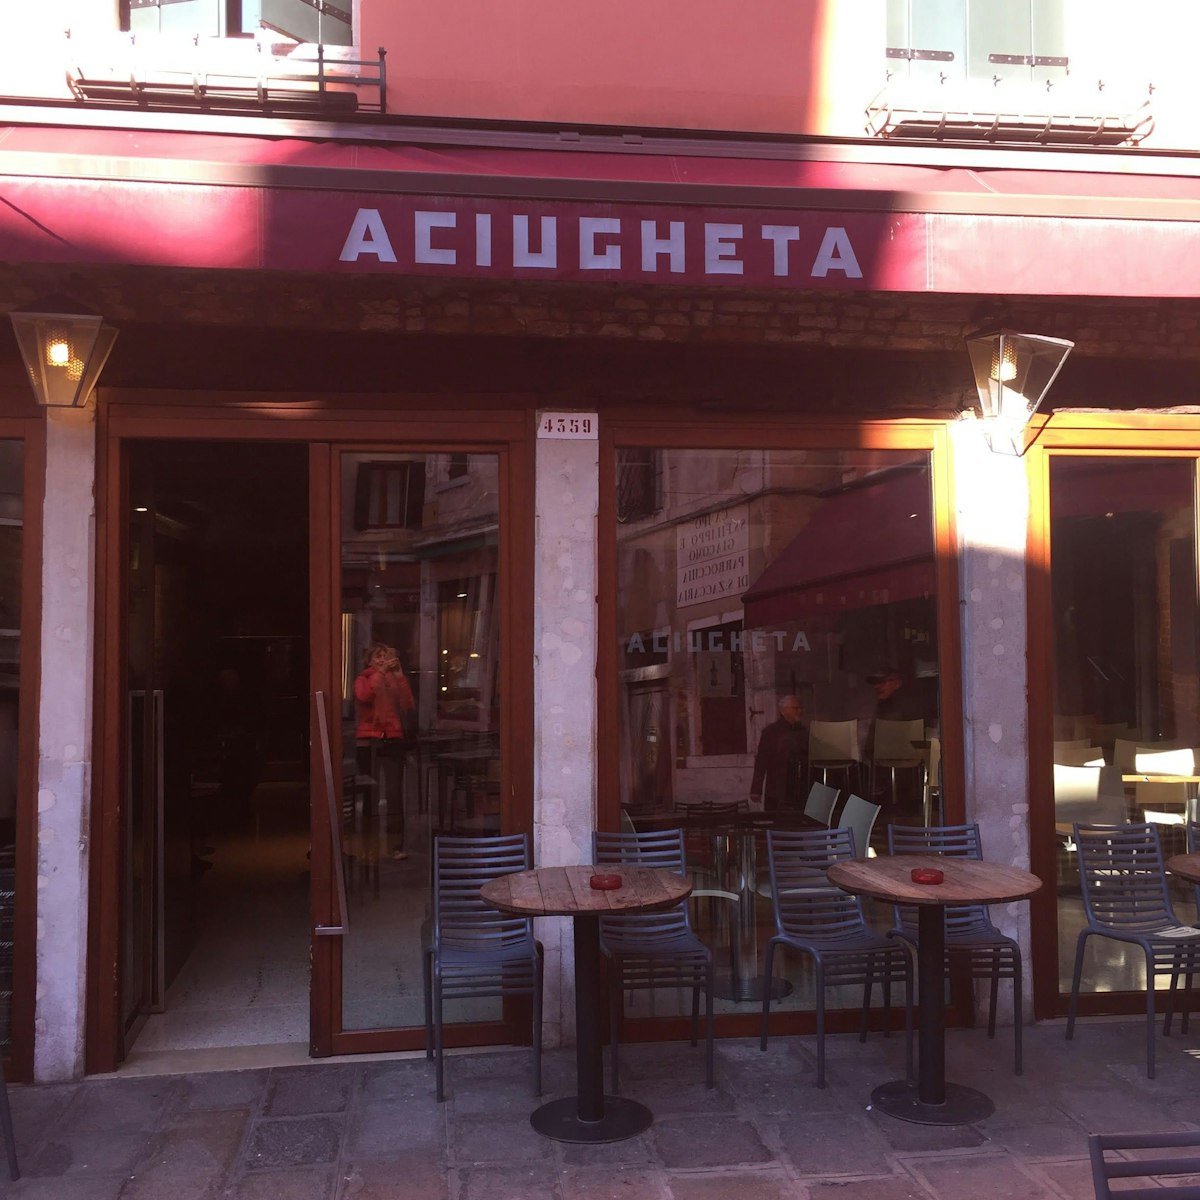 The entrance to Aciugheta, a stone's throw from St Mark's Square